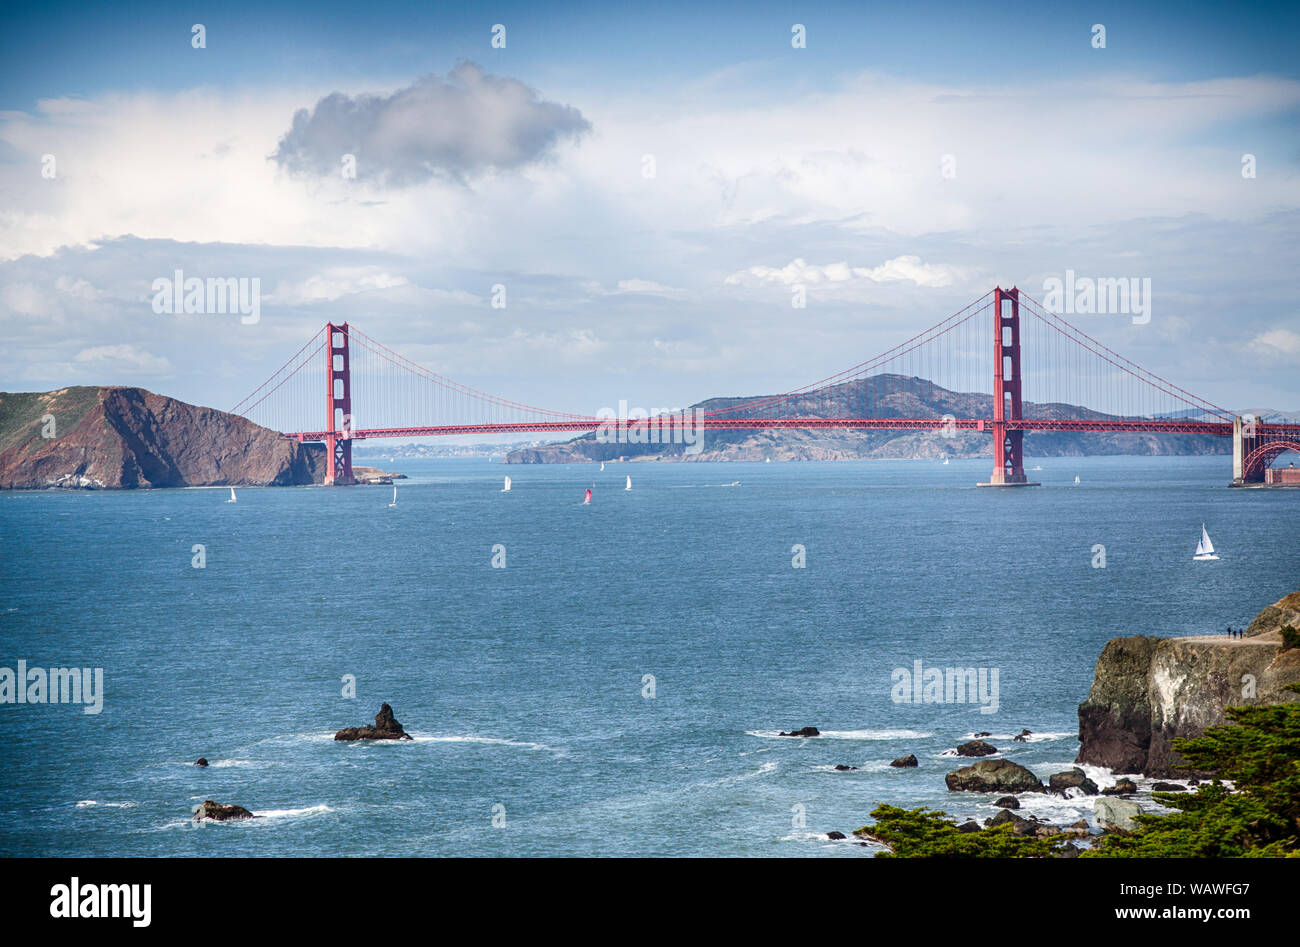 Sail boats in the San Francisco bay with the Golden Gate bridge in the background as taken from Lands End. Stock Photo